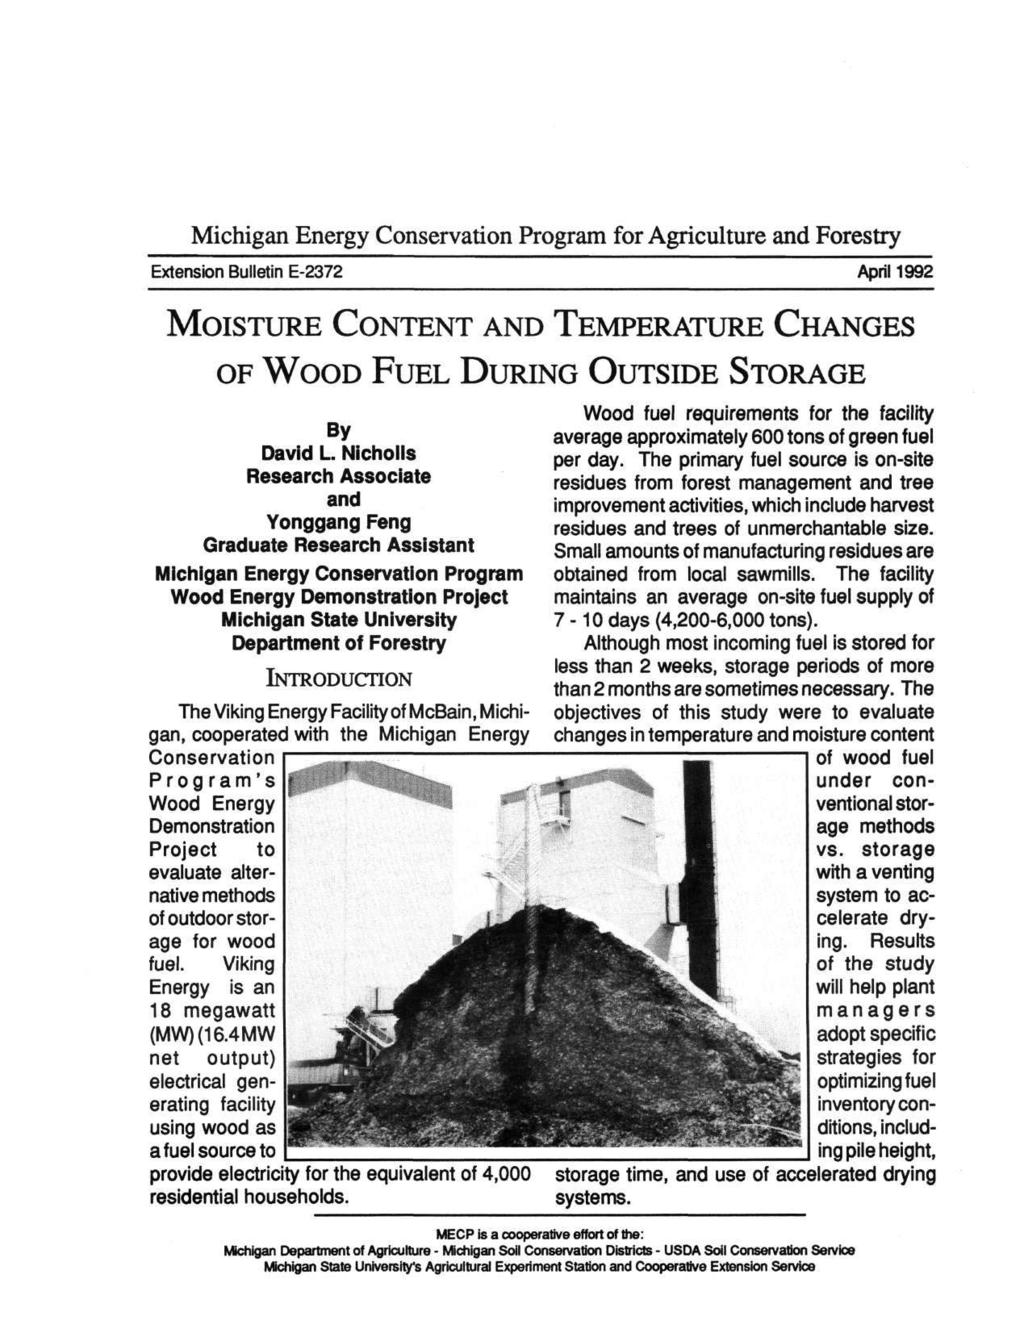 Michigan Energy Conservation Program for Agriculture and Forestry Extension Bulletin E-2372 April 1992 MOISTURE CONTENT AND TEMPERATURE CHANGES OF WOOD FUEL DURING OUTSIDE STORAGE By David L.